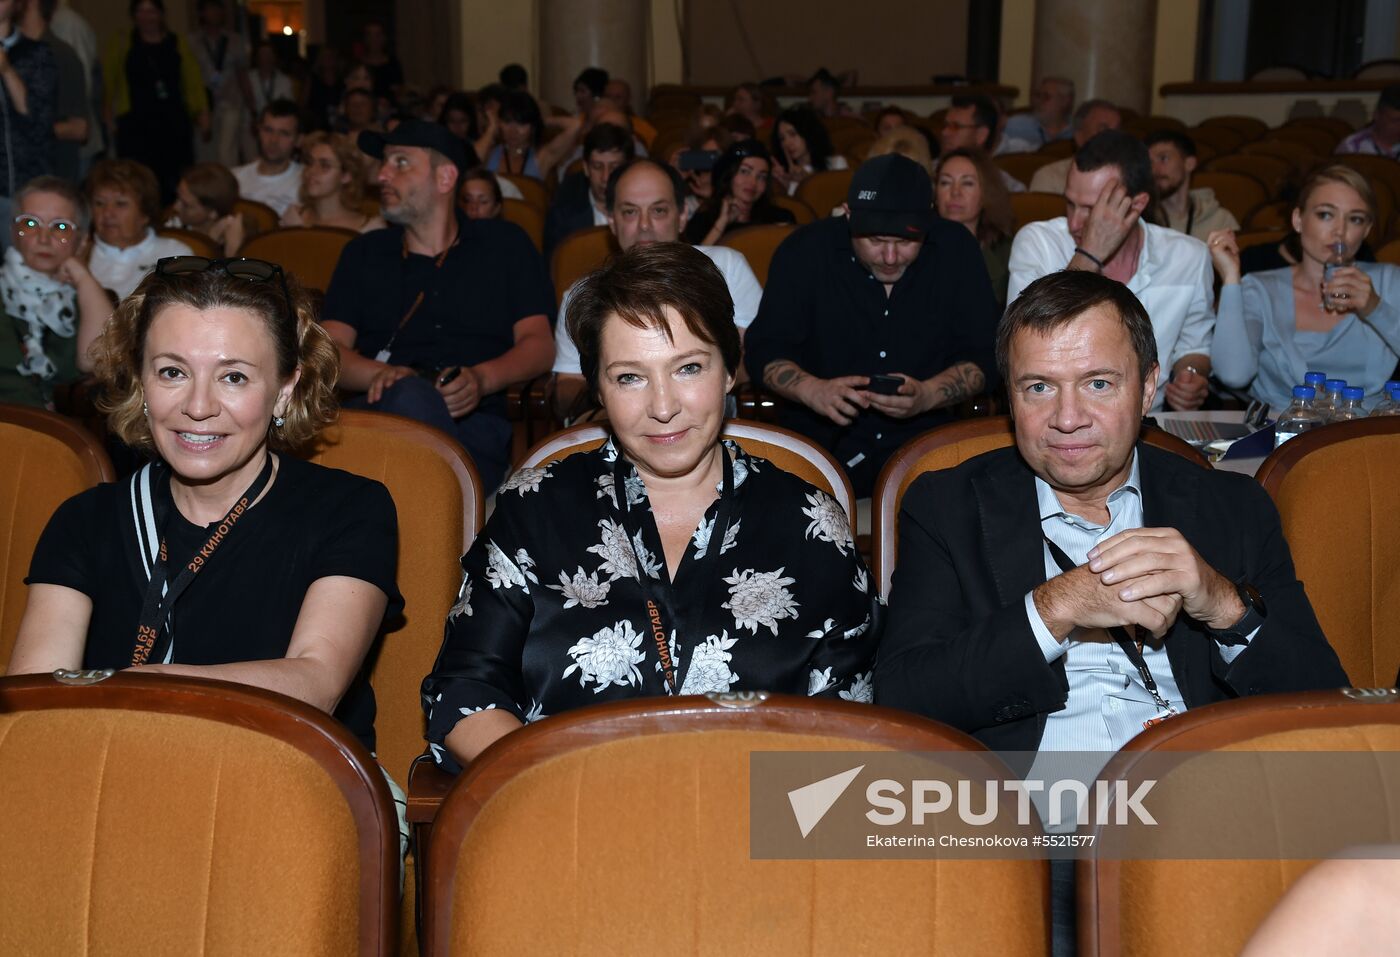 29th Kinotavr Open Russian Film Festival. Day four